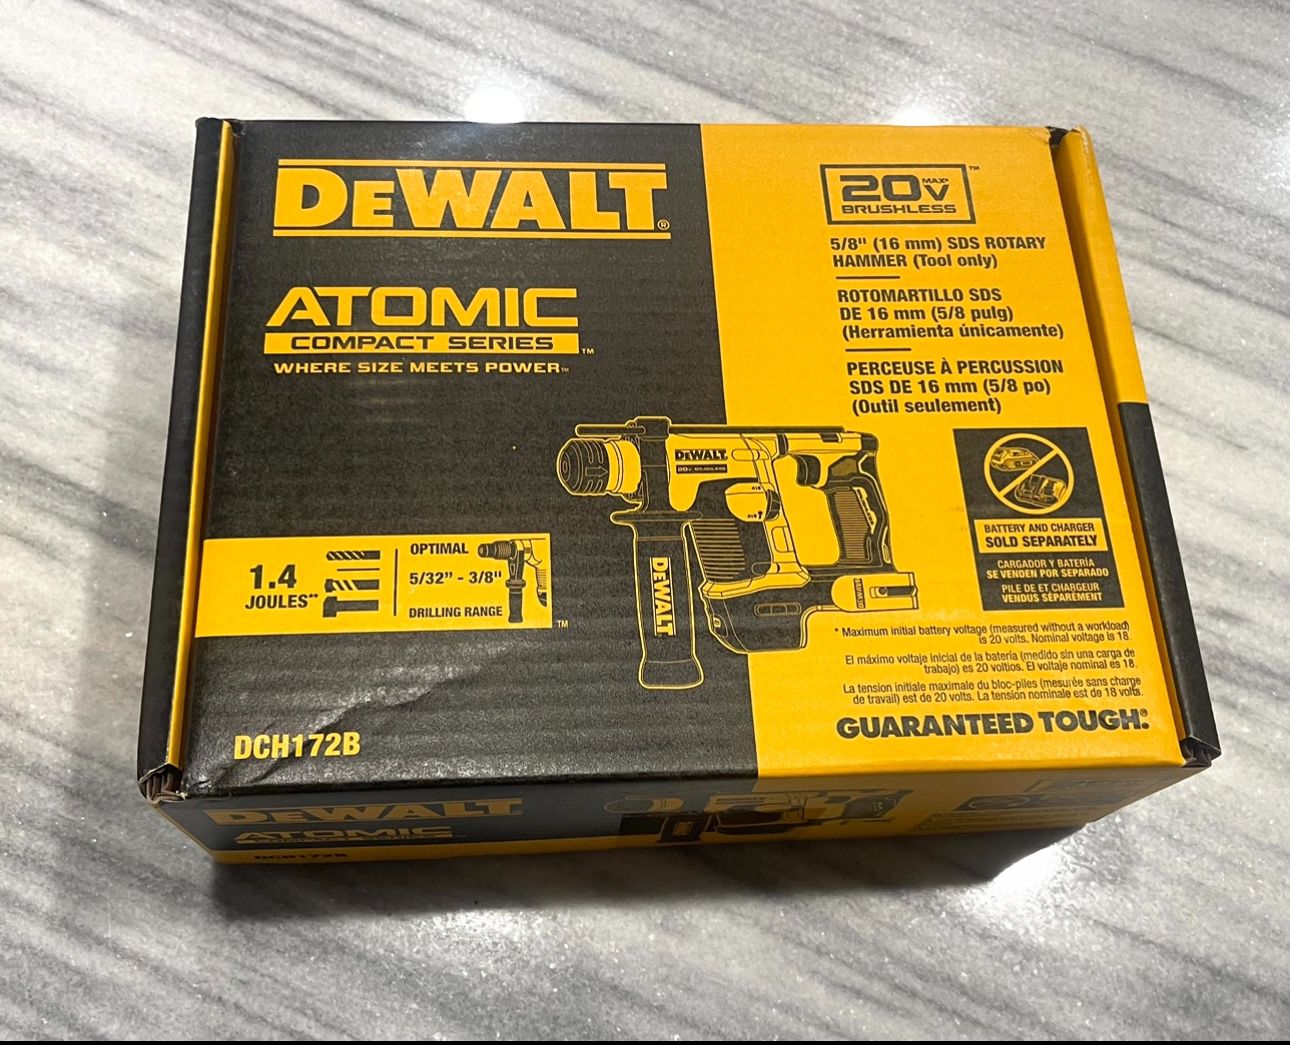 Brand New Dewalt DCH172B Cordless 20 Volt Atomic 5/8 SDS Rotary Hammer Tool Only New in Box